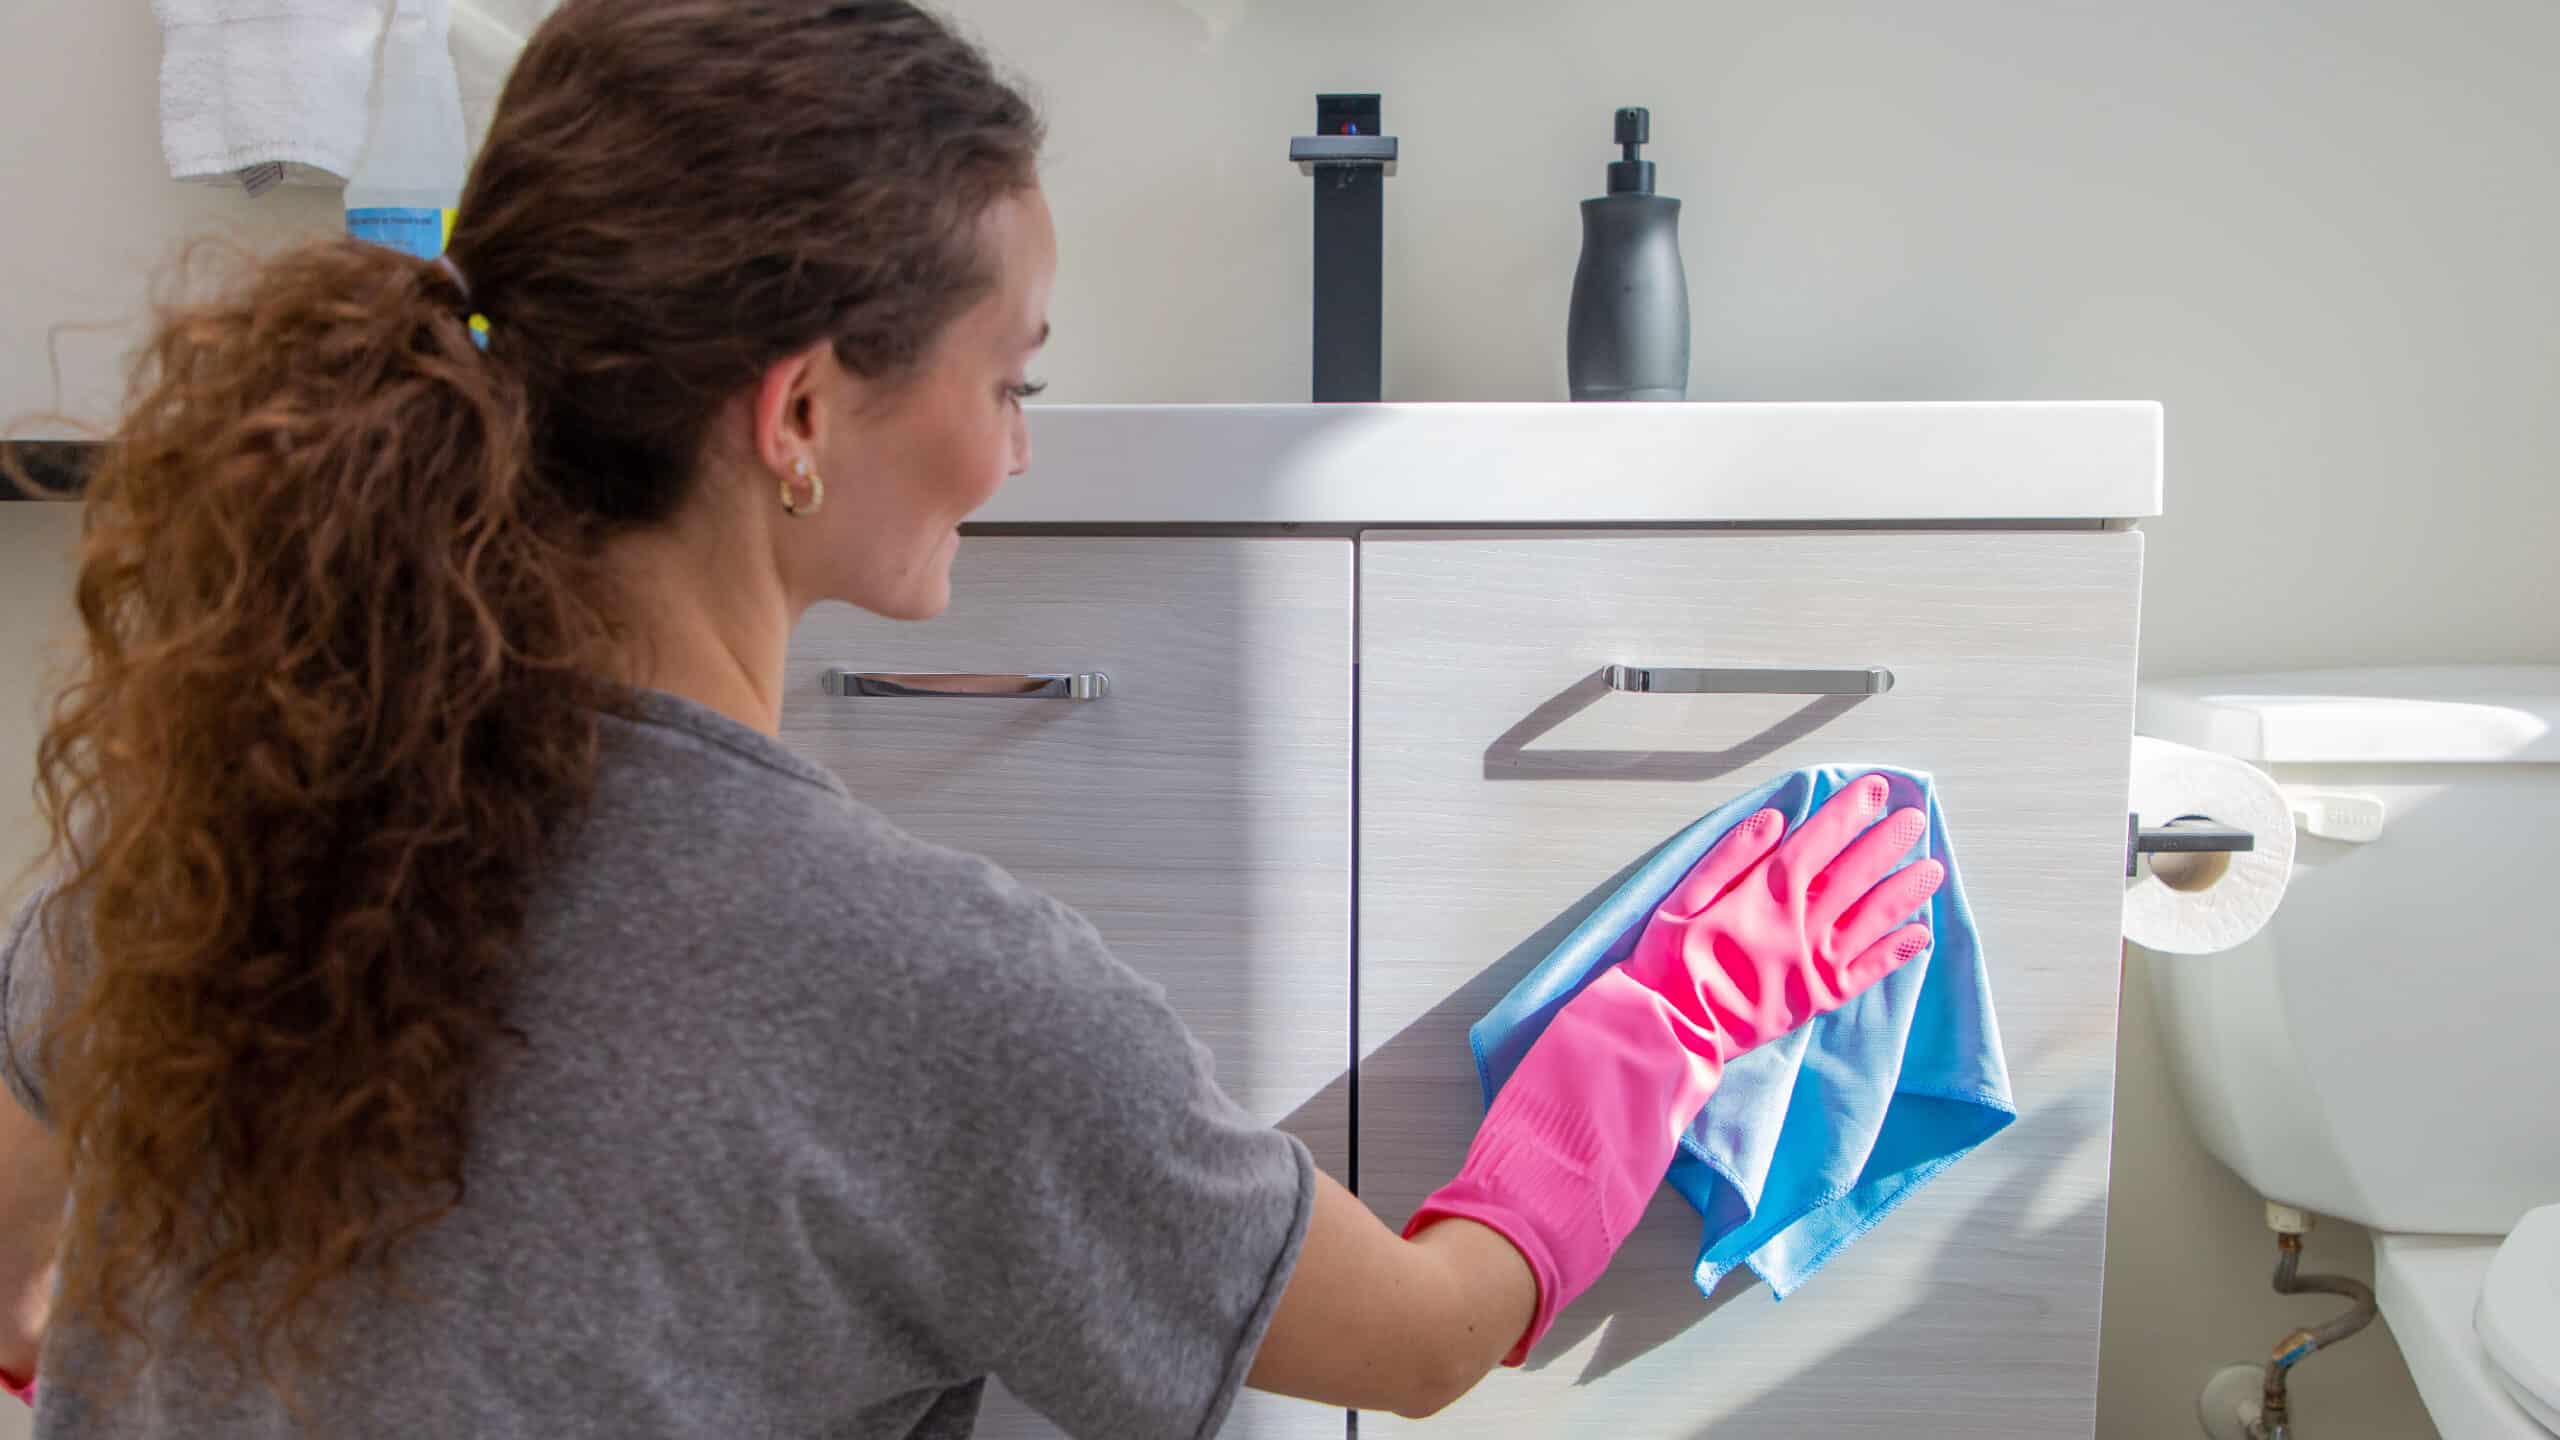 The Best Bathroom Cleaning Supplies to Get The Job Done